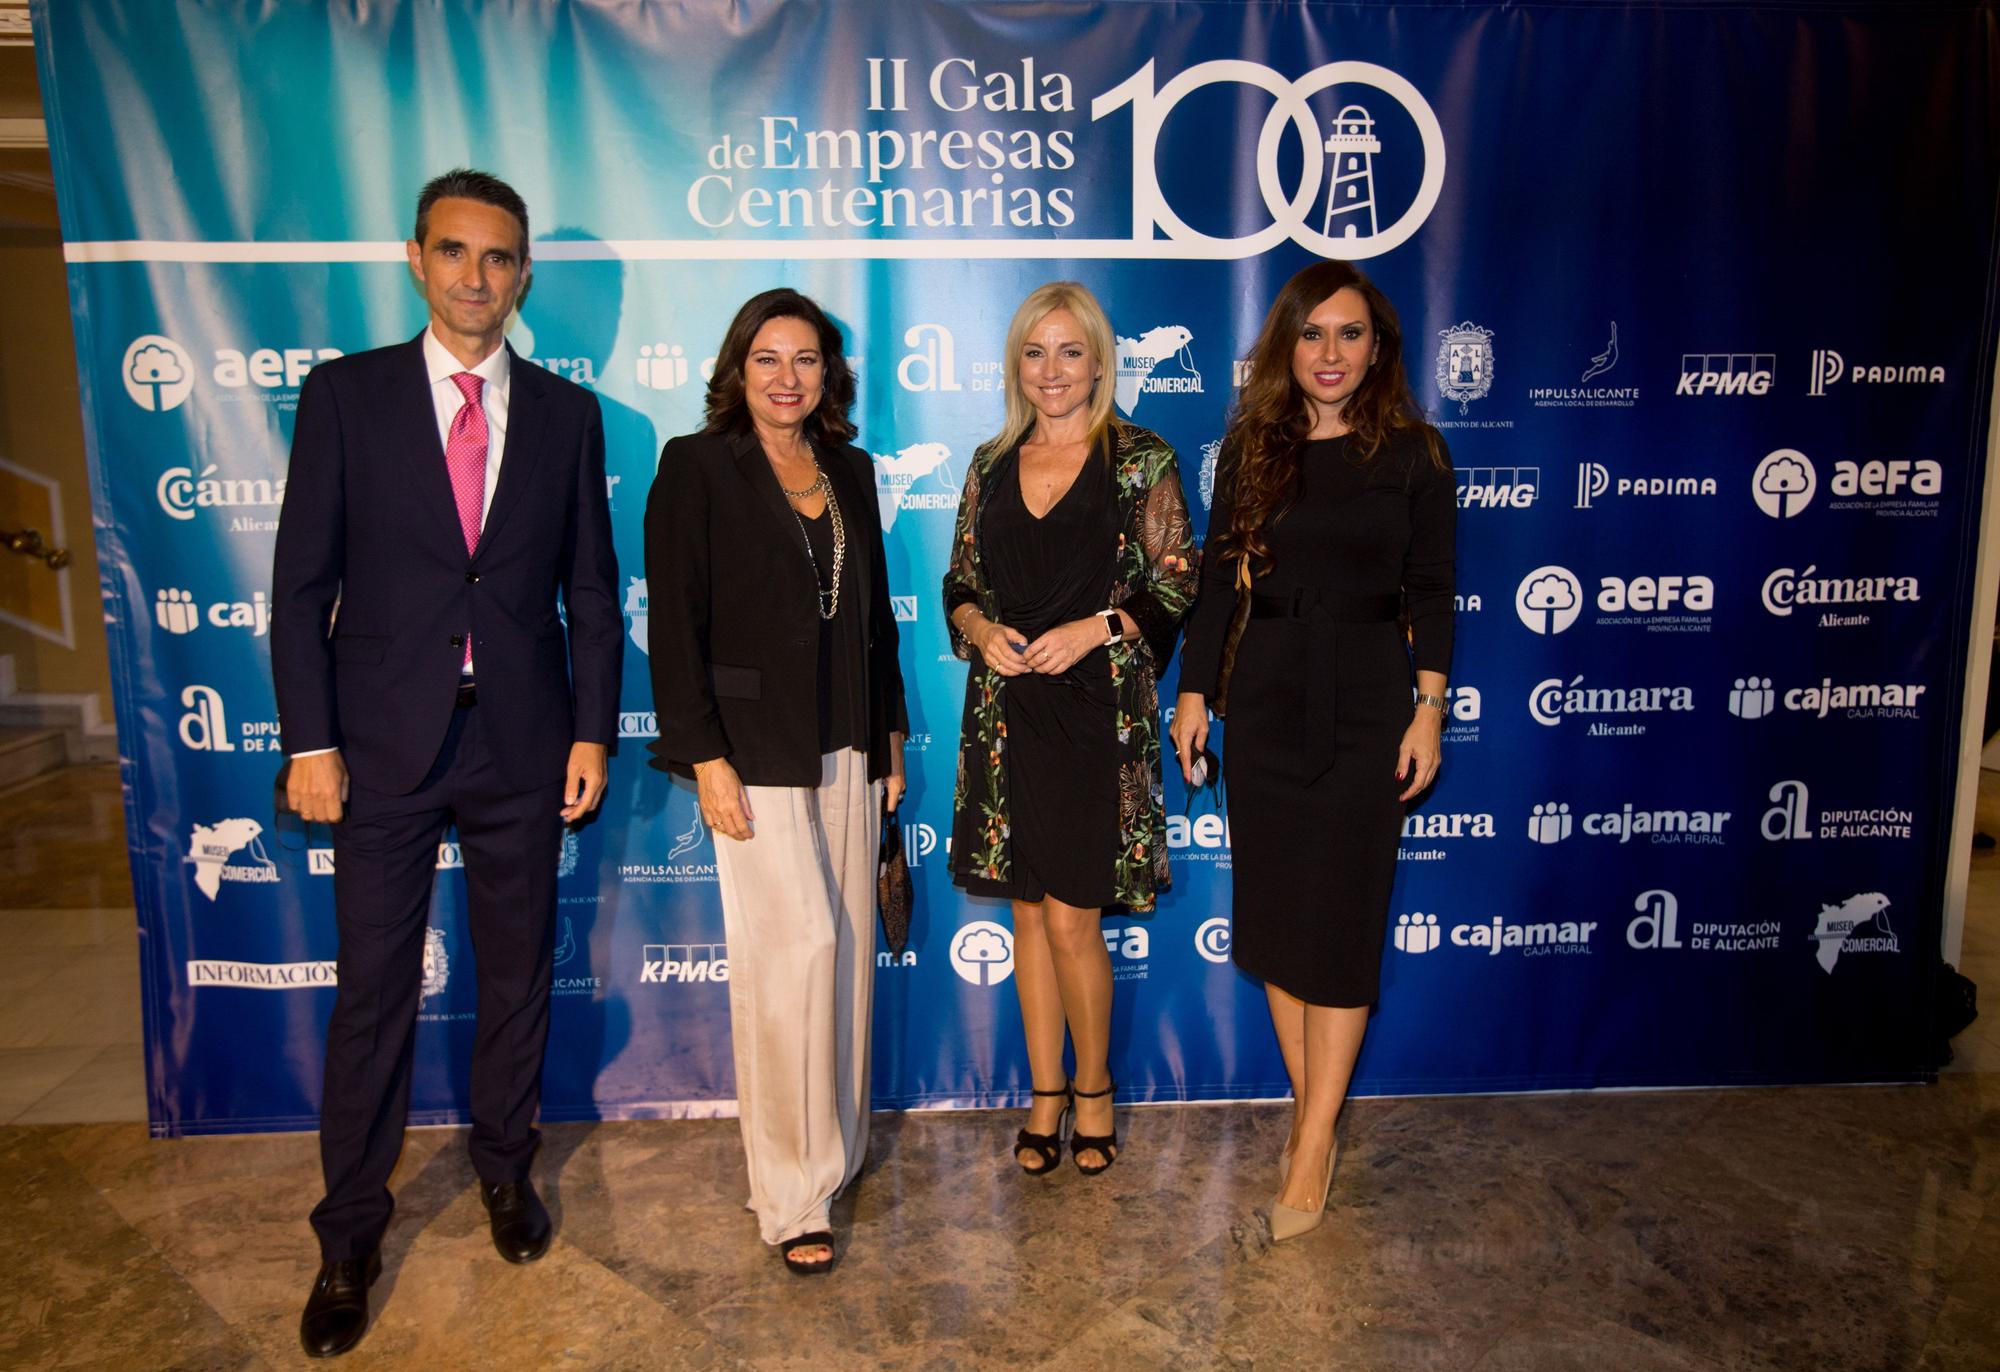 The Centennial Companies Gala in images